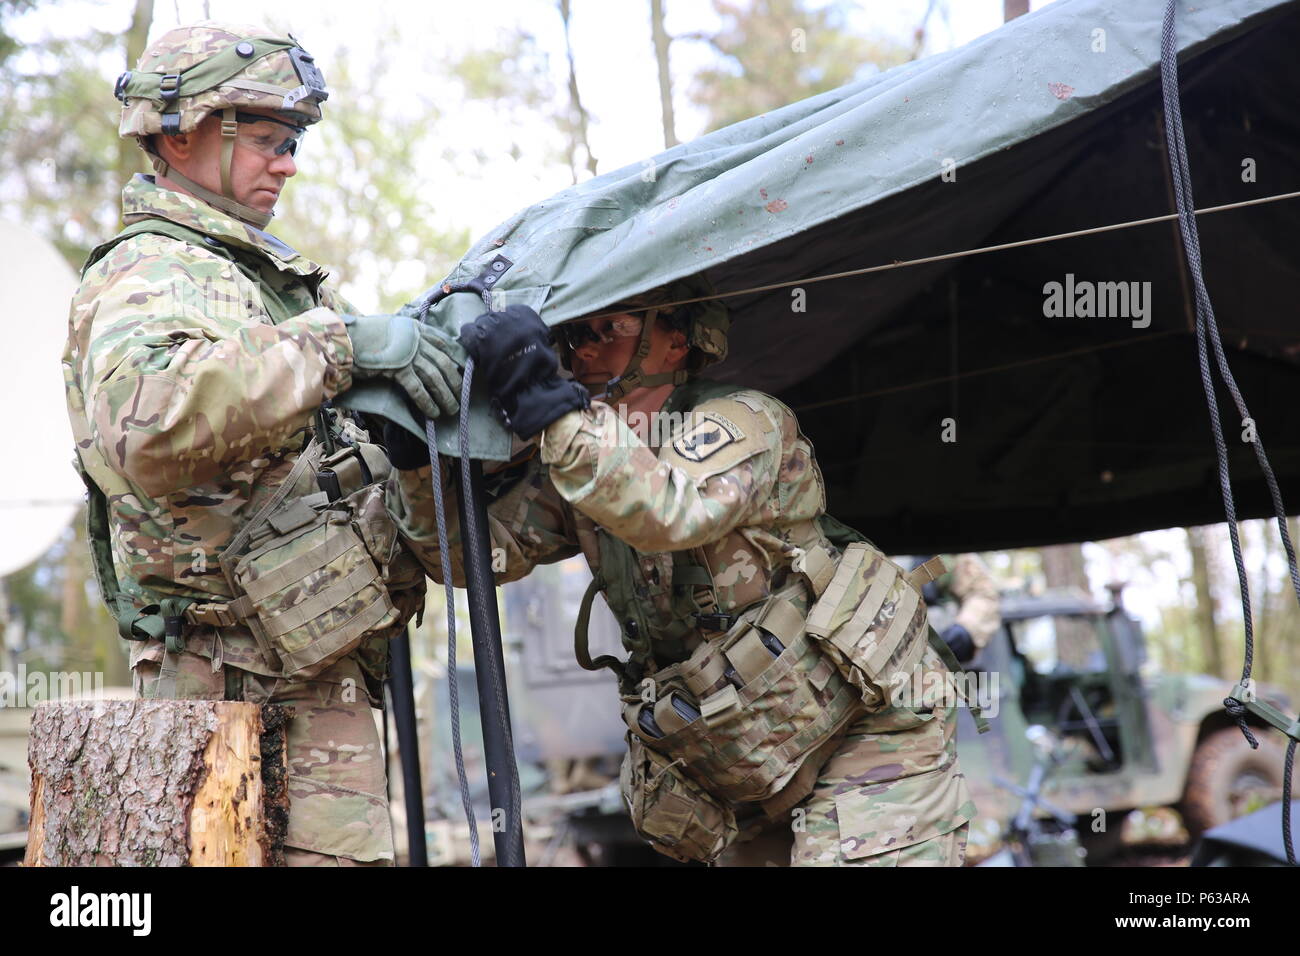 U.S. Soldiers of 1st Squadron, 91st Cavalry Regiment, 173rd Airborne Brigade construct a tent while conducting tactical operations during exercise Saber Junction 16 at the U.S. Army’s Joint Multinational Readiness Center (JMRC) in Hohenfels, Germany, April 16, 2016. Saber Junction 16 is the U.S. Army Europe’s 173rd Airborne Brigade’s combat training center certification exercise, taking place at the JMRC in Hohenfels, Germany, Mar. 31-Apr. 24, 2016.  The exercise is designed to evaluate the readiness of the Army’s Europe-based combat brigades to conduct unified land operations and promote inte Stock Photo